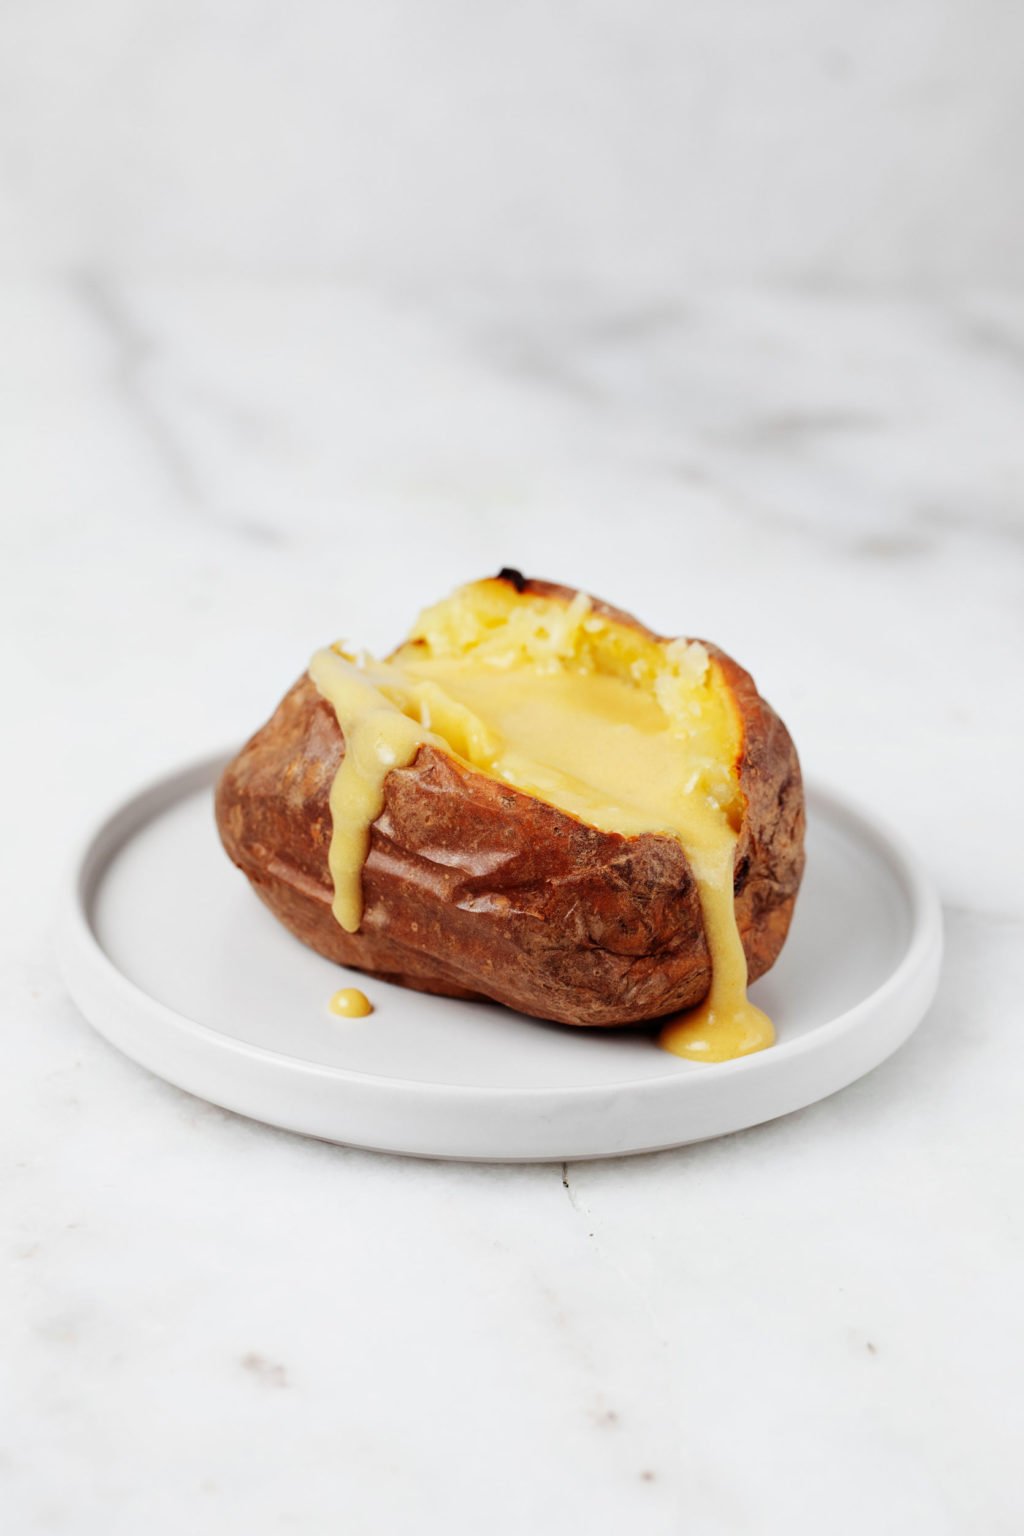 A baked potato rests on a small white plate against a marble surface. It's topped with a creamy topping.